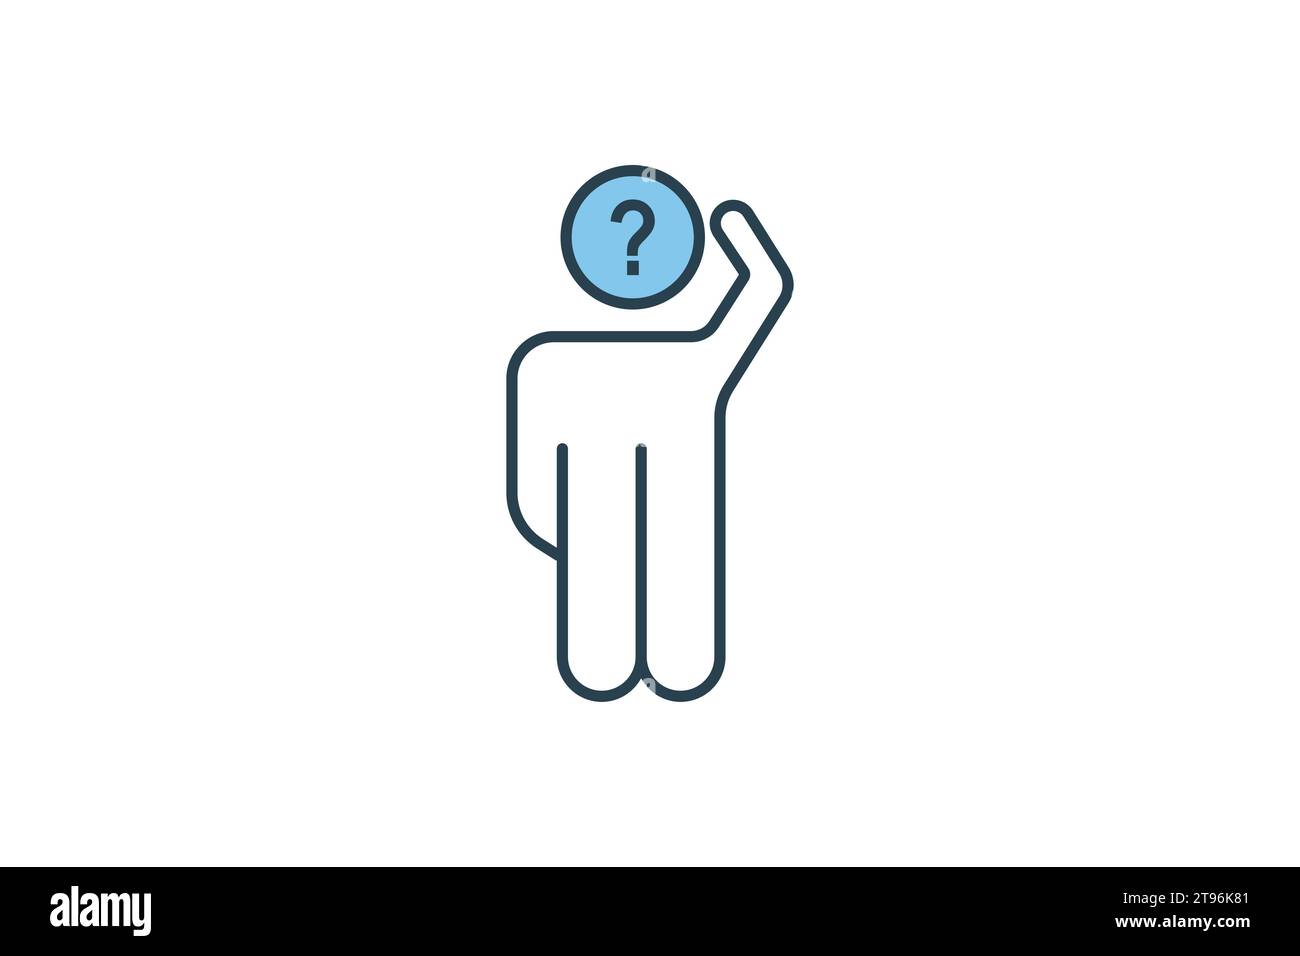 confused icon. human scratching head and question mark. icon related to confusion. flat line icon style. simple vector design editable Stock Vector